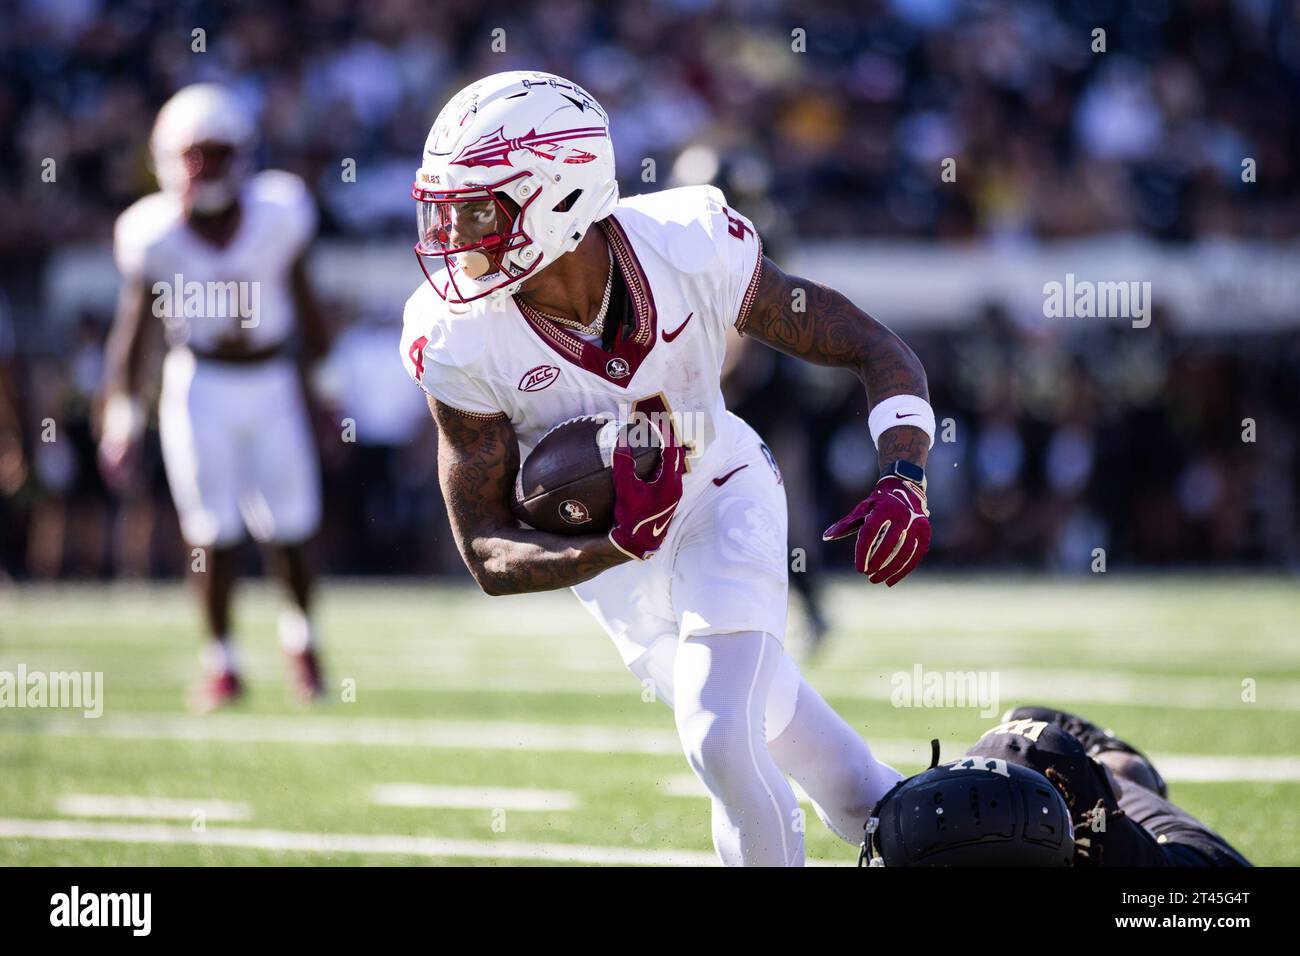 Winston-Salem, NC, USA. 28th Oct, 2023. Florida State Seminoles wide receiver Keon Coleman (4) runs after a reception during the NCAA football game between the Florida State Seminoles and the Wake Forest Demon Deacons at Allegacy Federal Credit Union Stadium in Winston-Salem, NC. Jonathan Huff/CSM/Alamy Live News Stock Photo